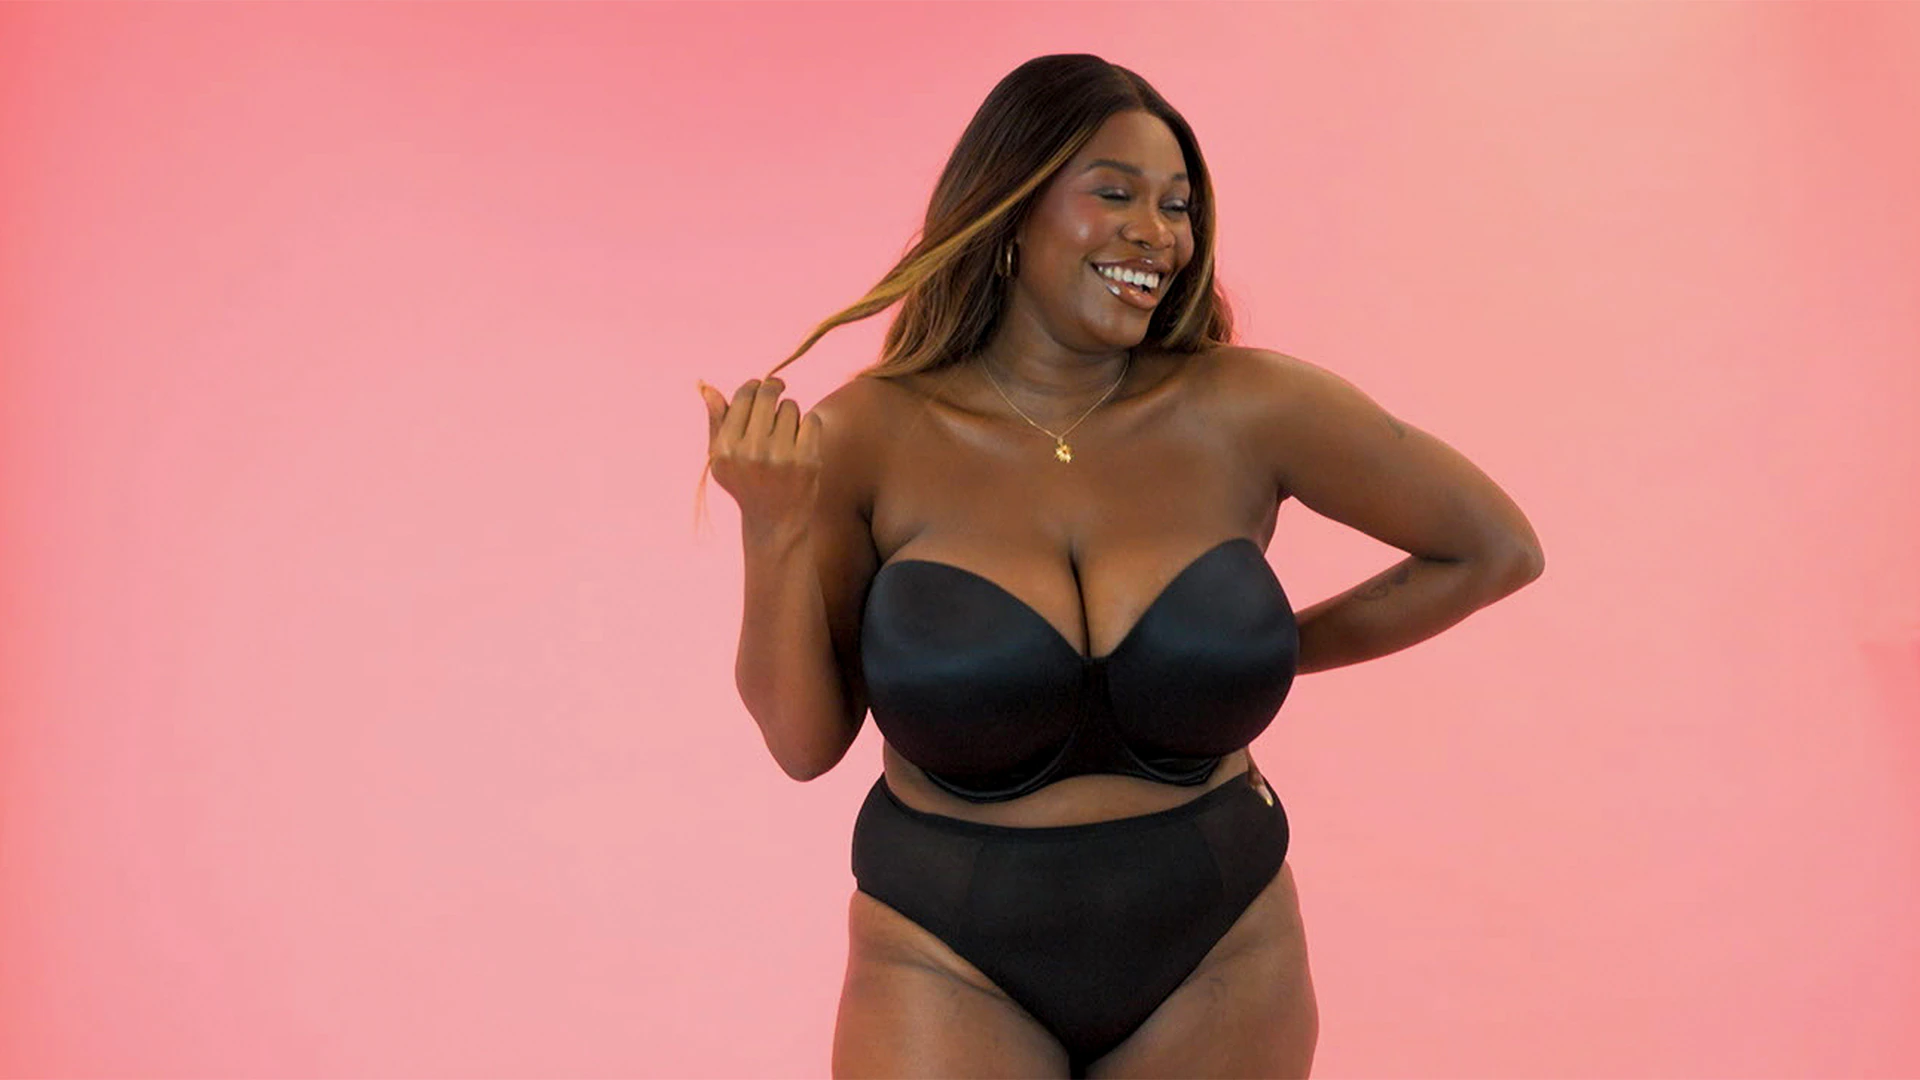 camron brown recommends the biggest black titties in the world pic